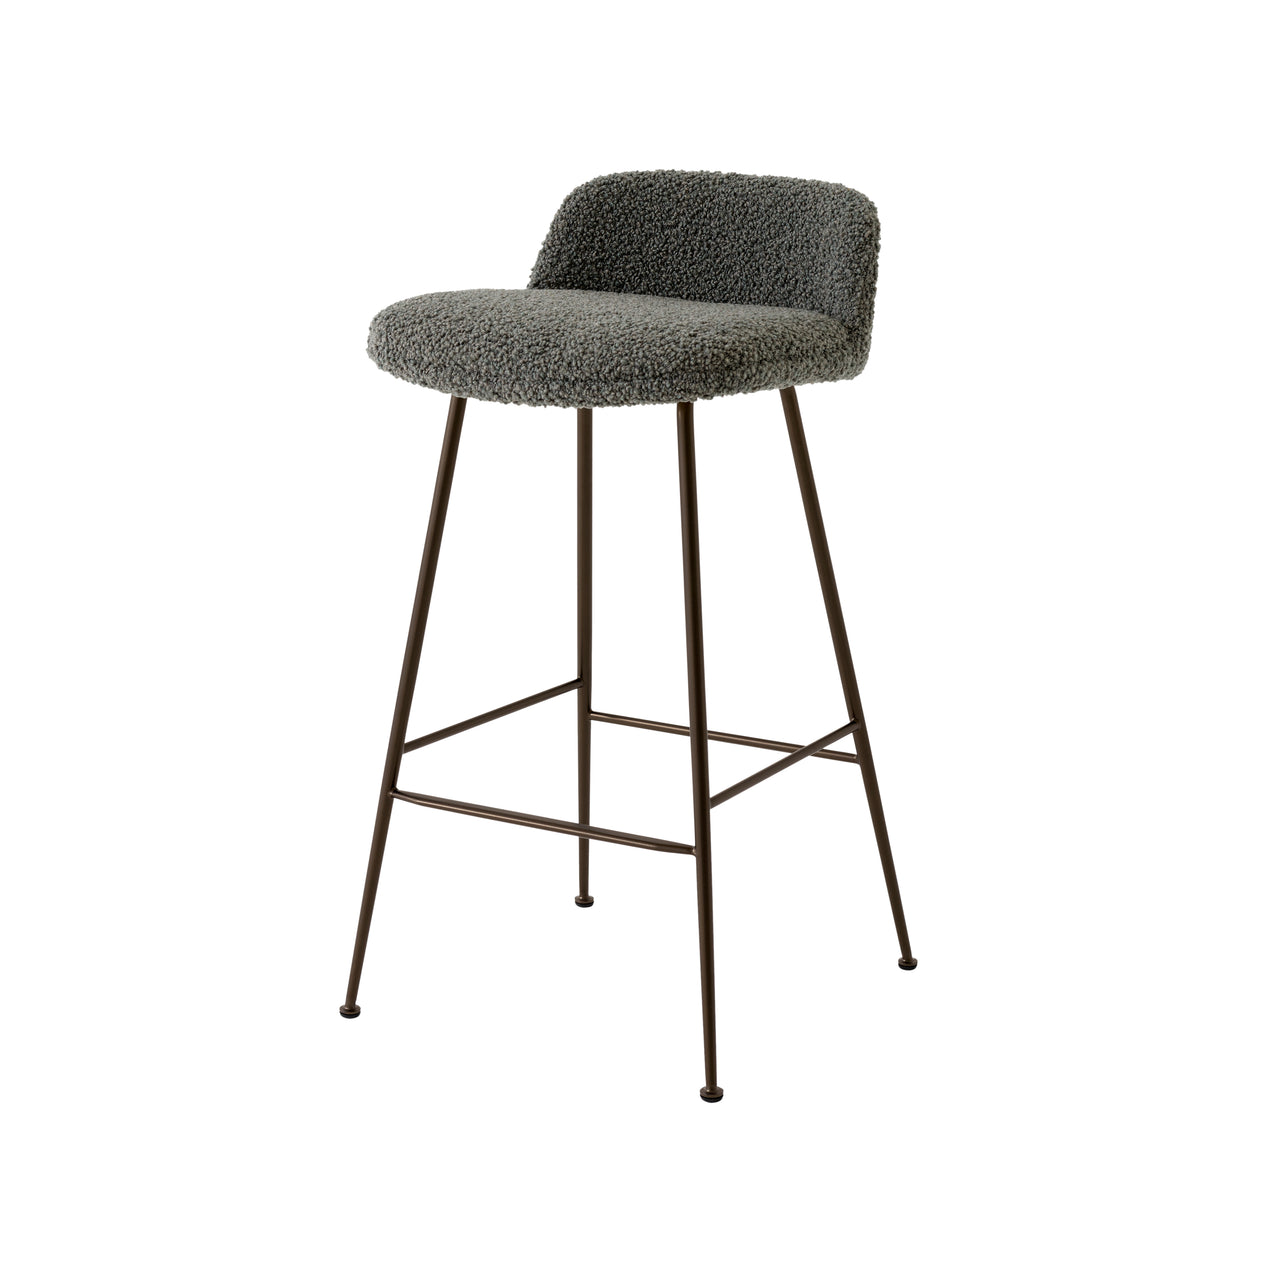 Rely Bar + Counter Stool: HW84 + HW89 + Counter (HW84) + Bronzed